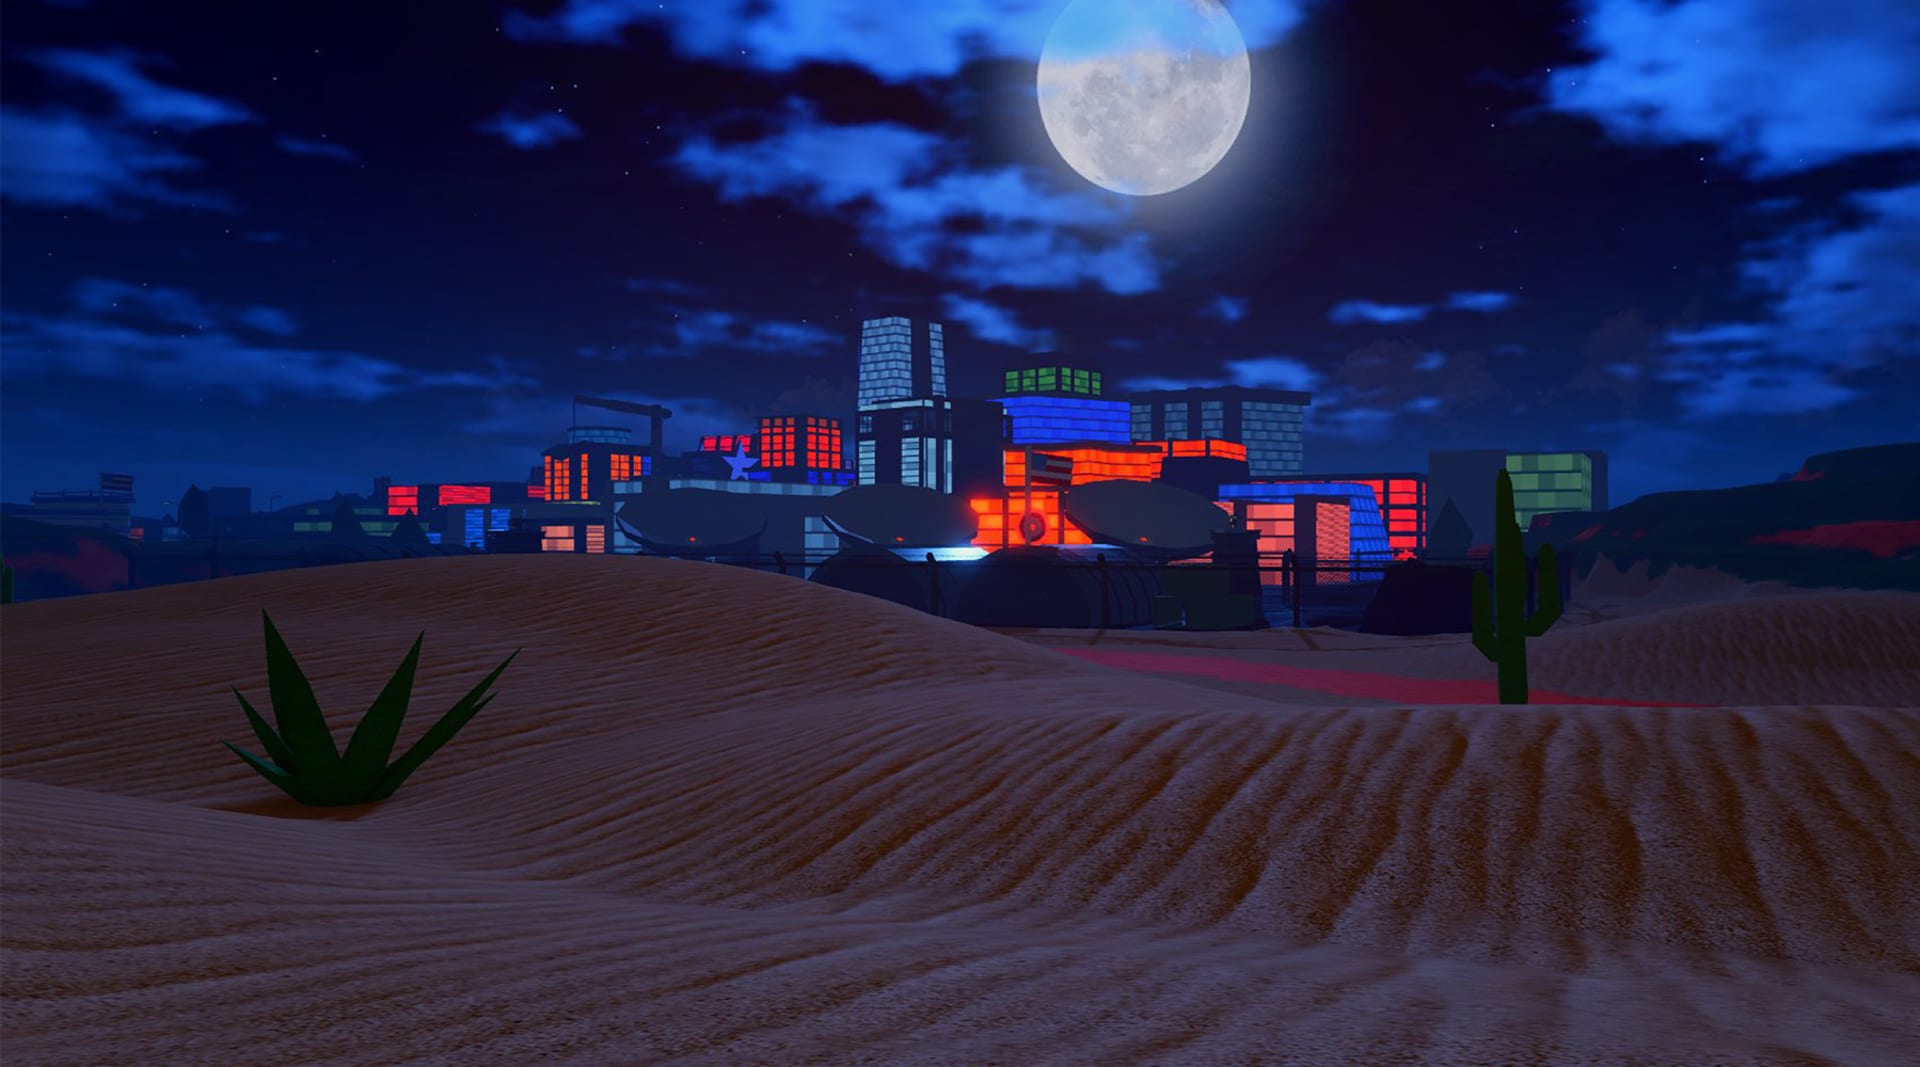 Digitally rendered landscape of a desert, with one aloe plant and one cactus sprouting from sandy hills. Beyond the desert, a city landscape with several skyscrapers under a full white moon.